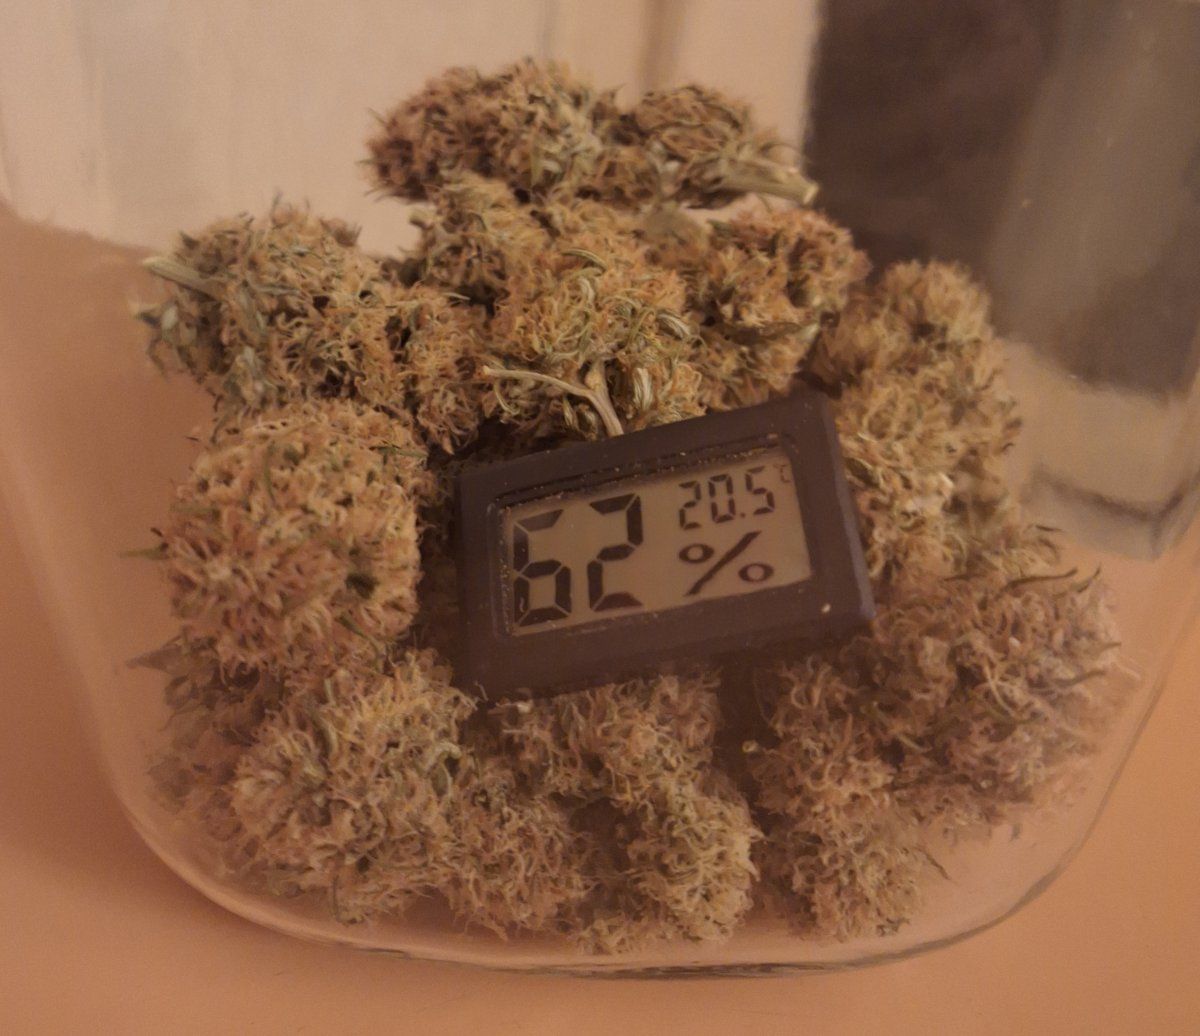 Adventures in low tech drying and curing